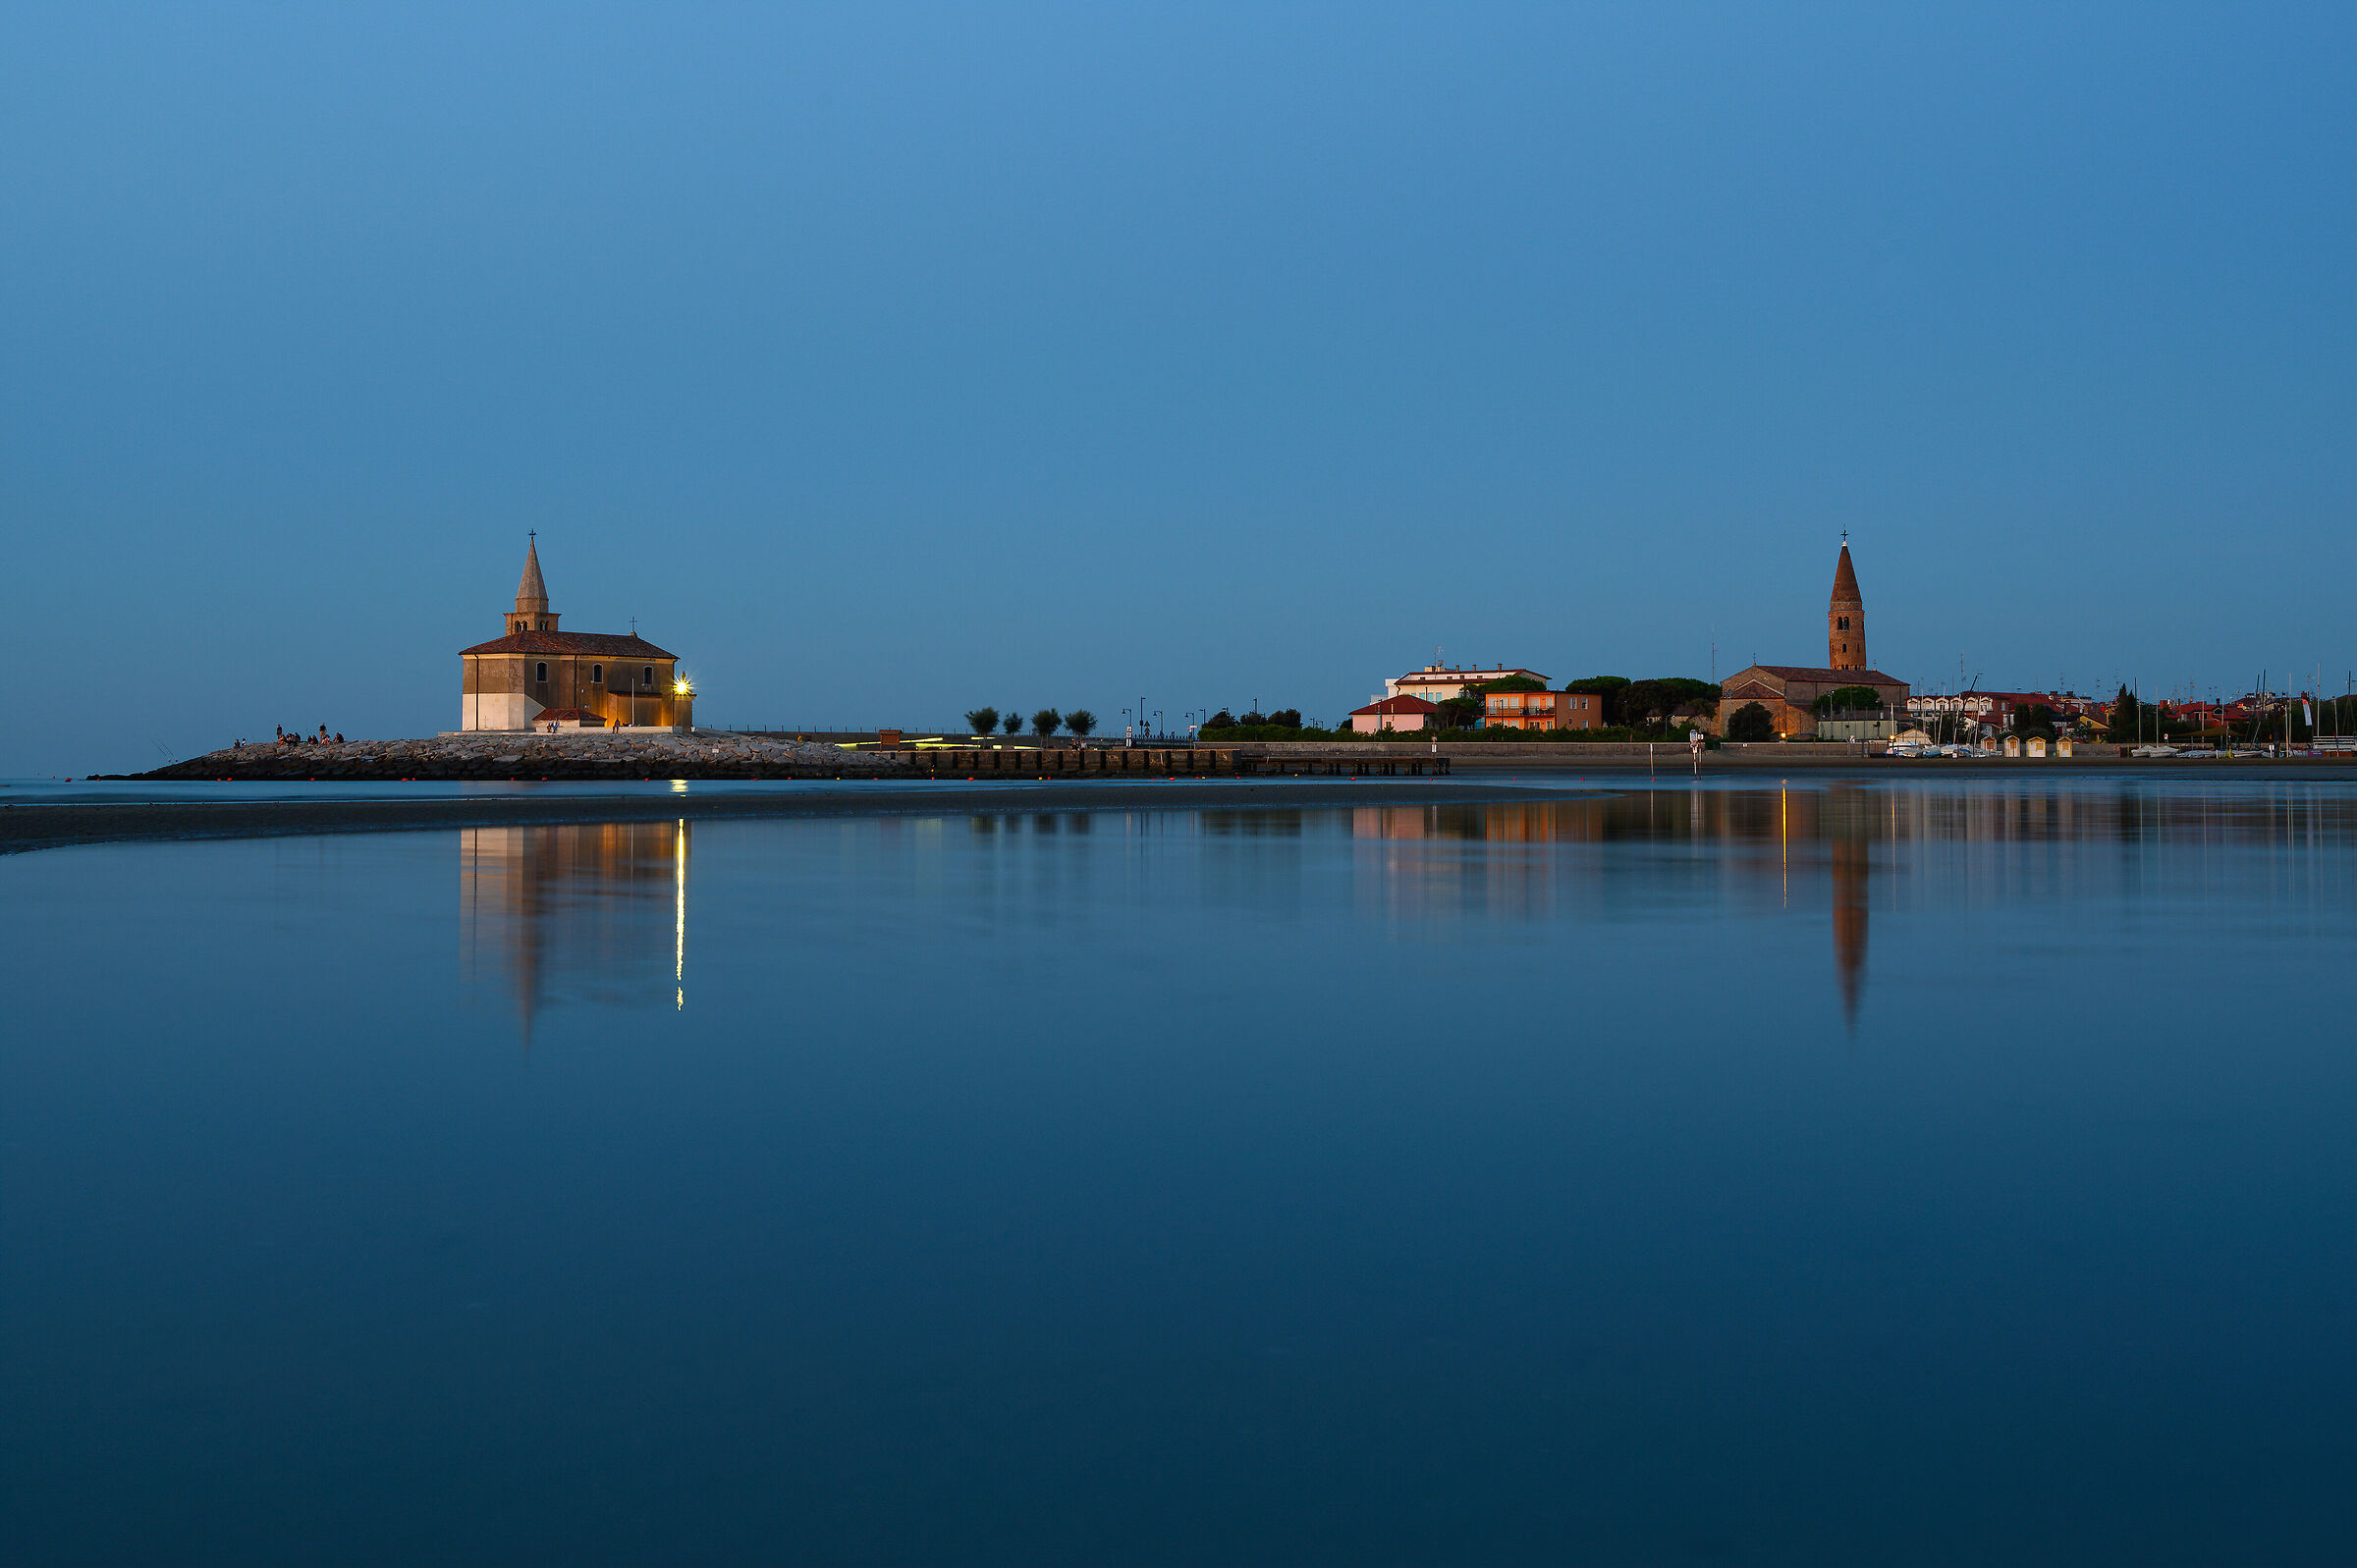 Caorle in the mirror...